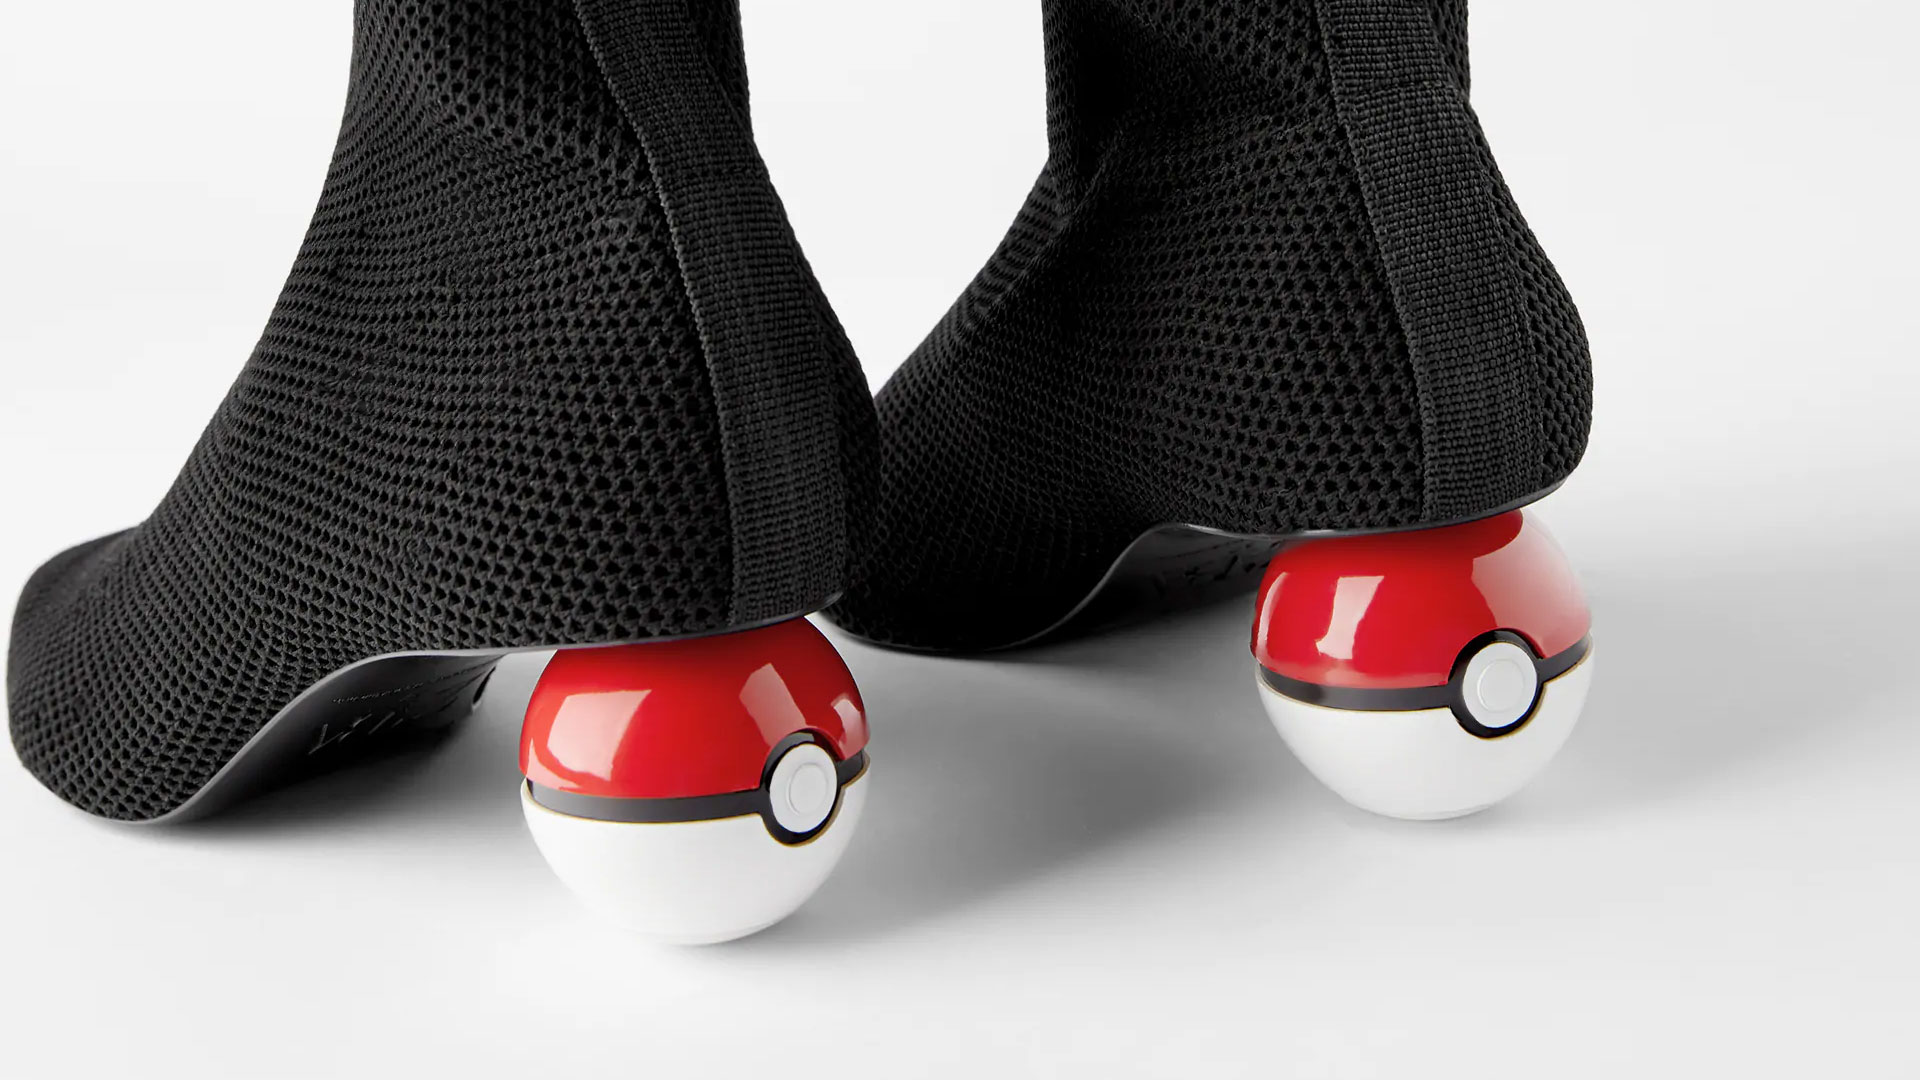 Now For Some Pokémon Boots